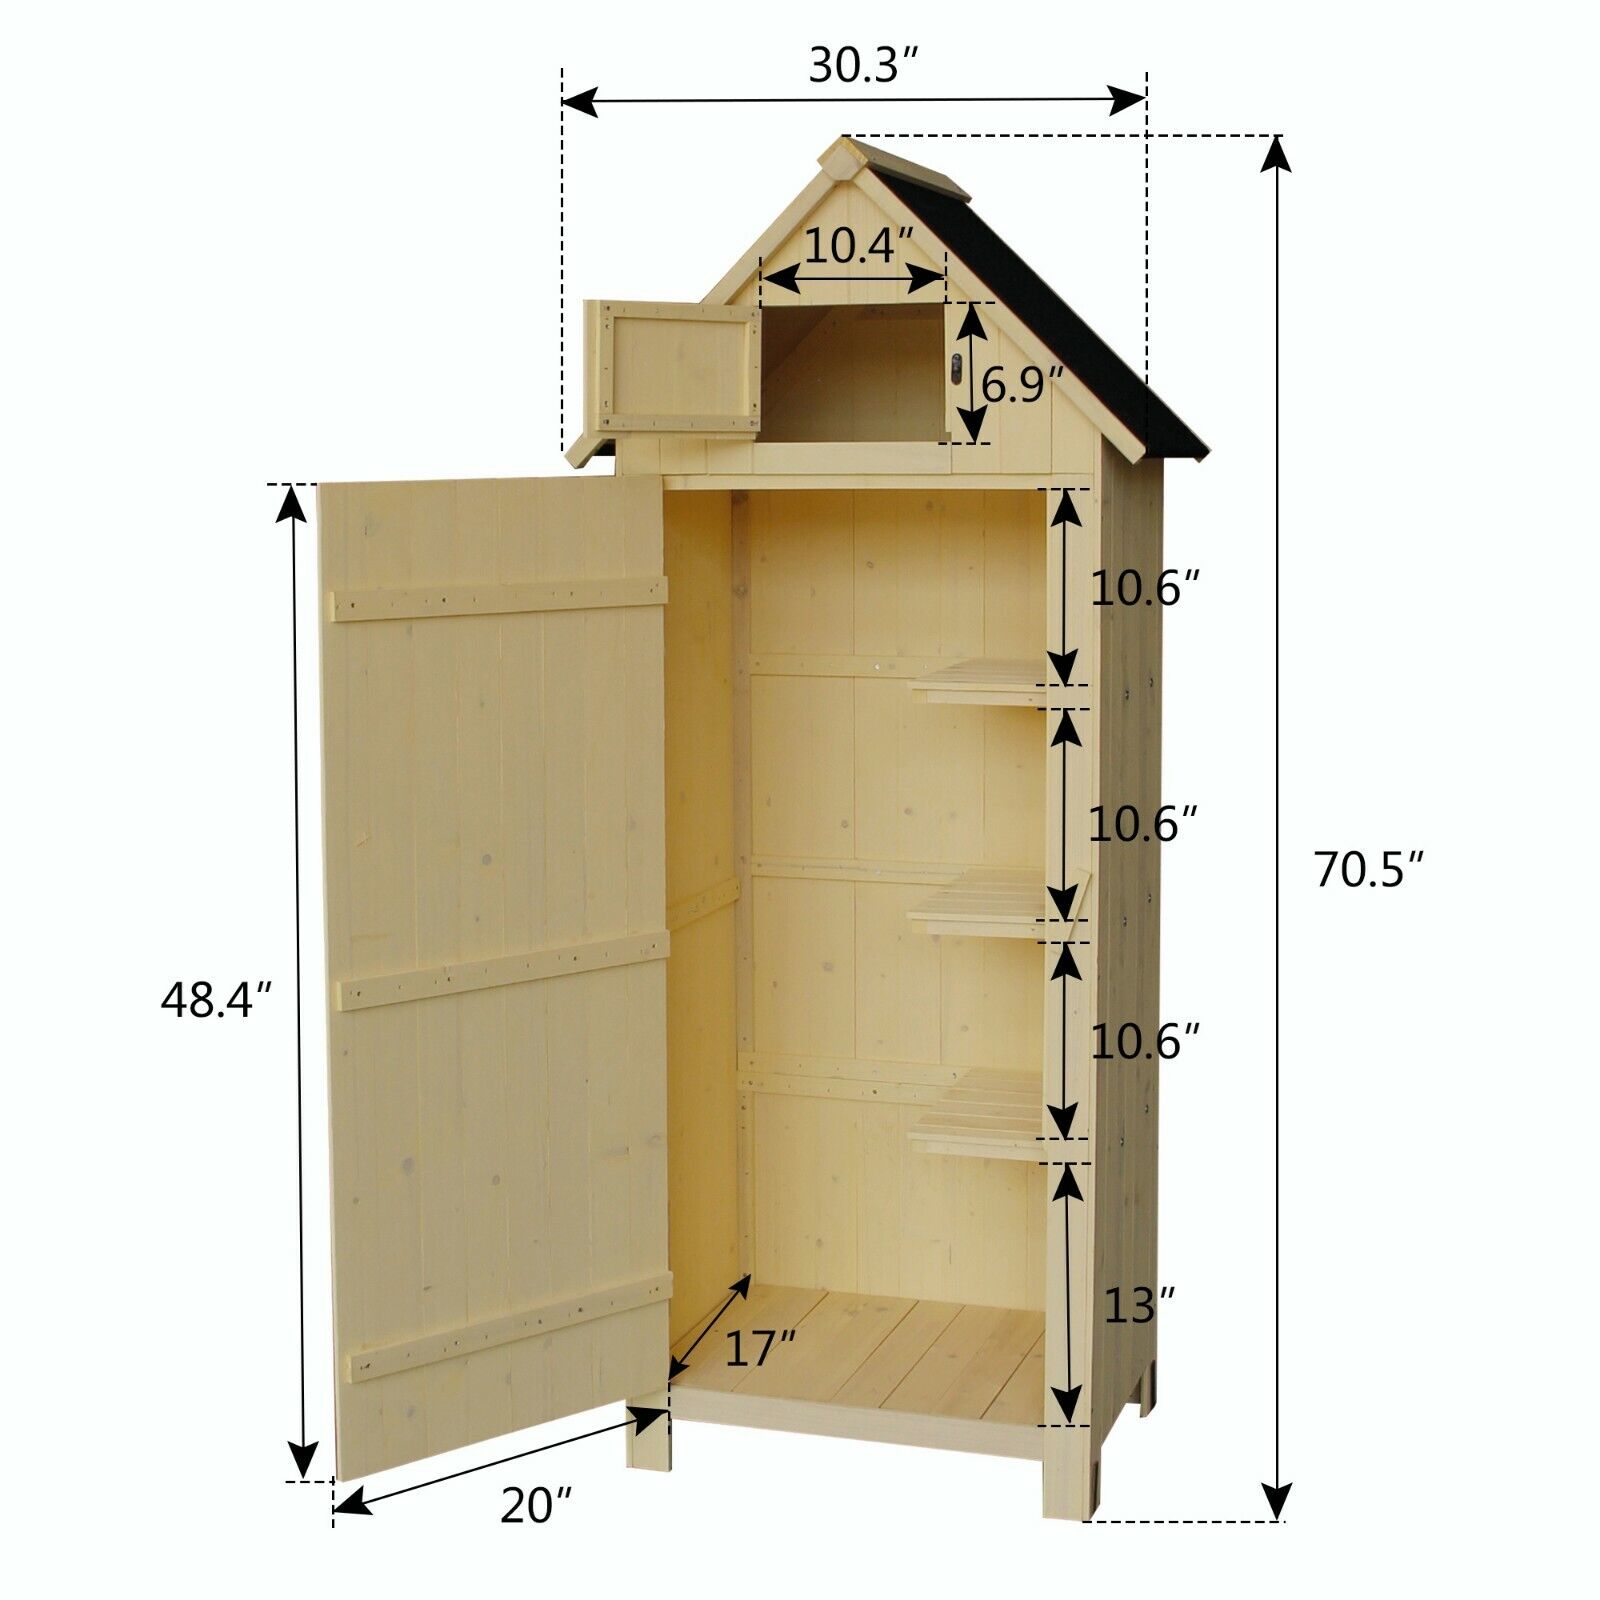 MCombo Storage Cabinet Tool Shed Wooden GardenWooden Lockers with Fir Wood